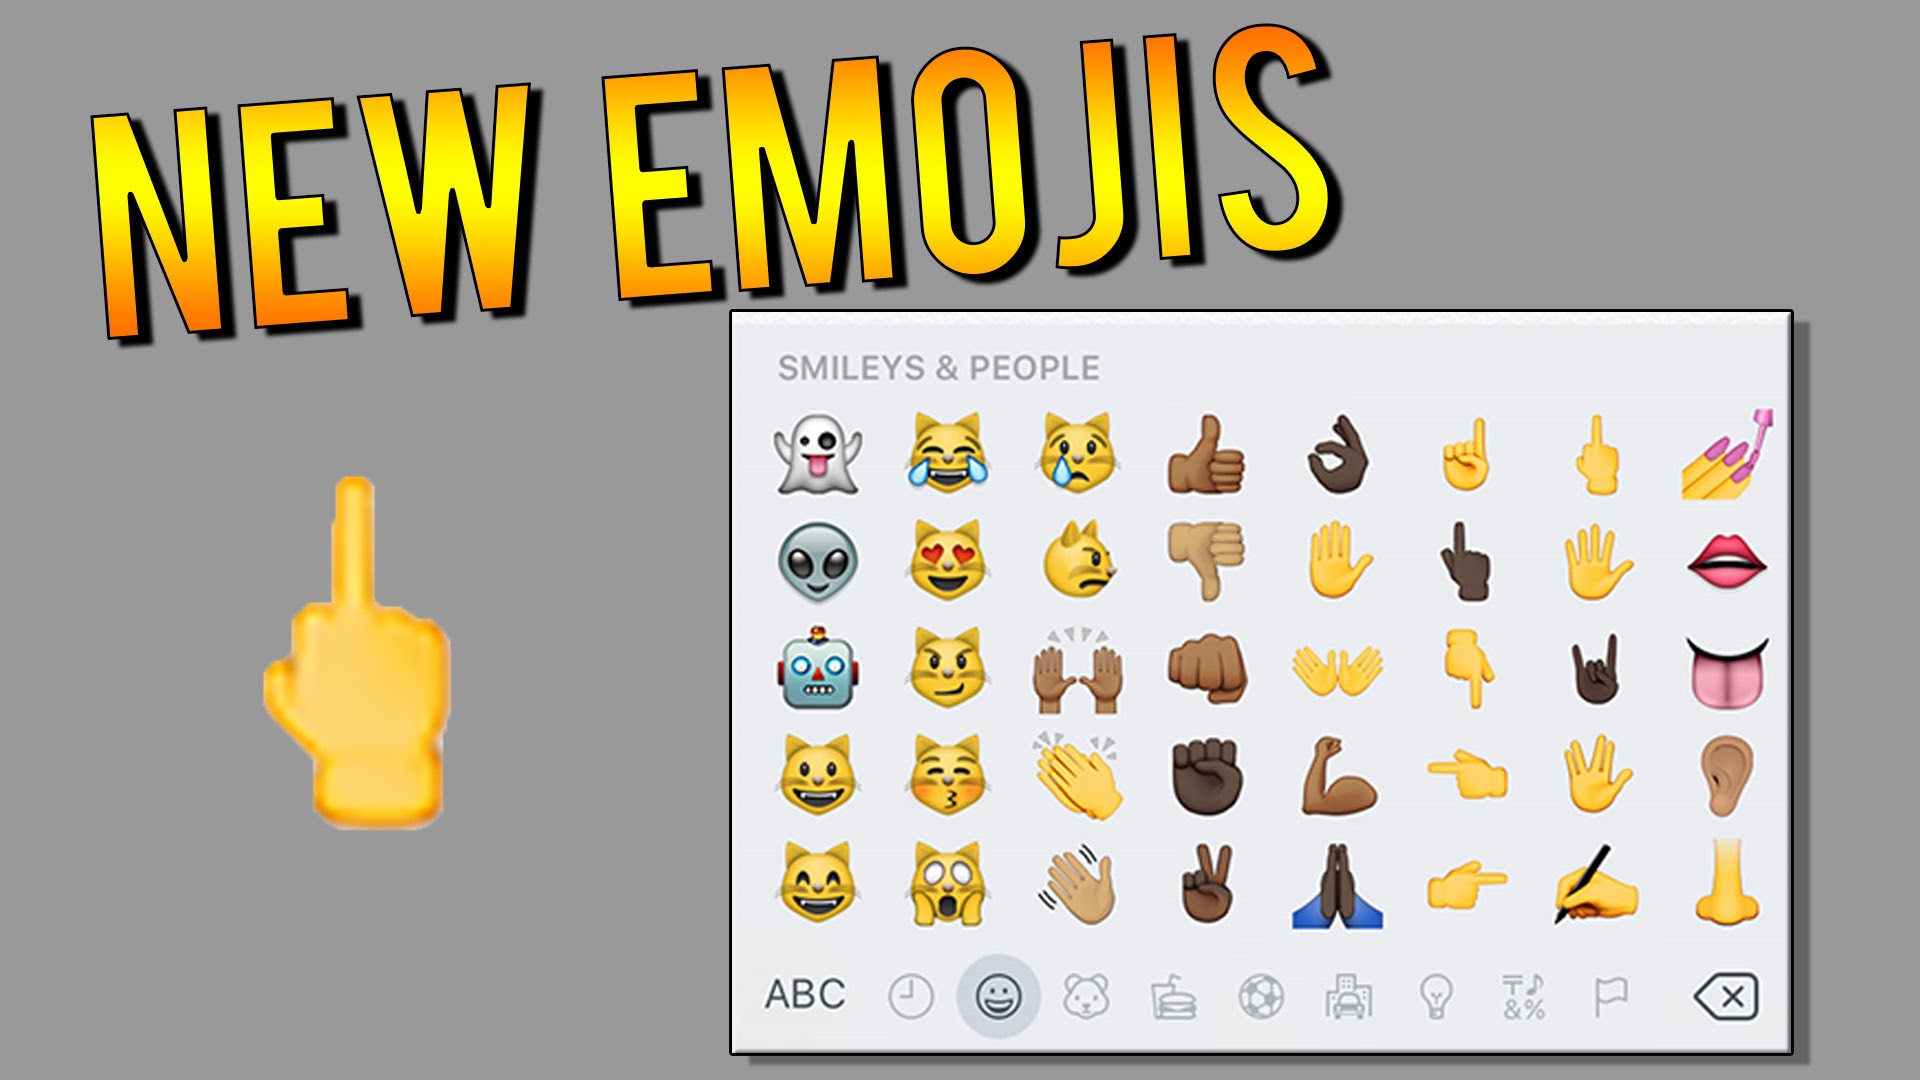 Burrito, unicorn and middle finger emojis are coming to your 